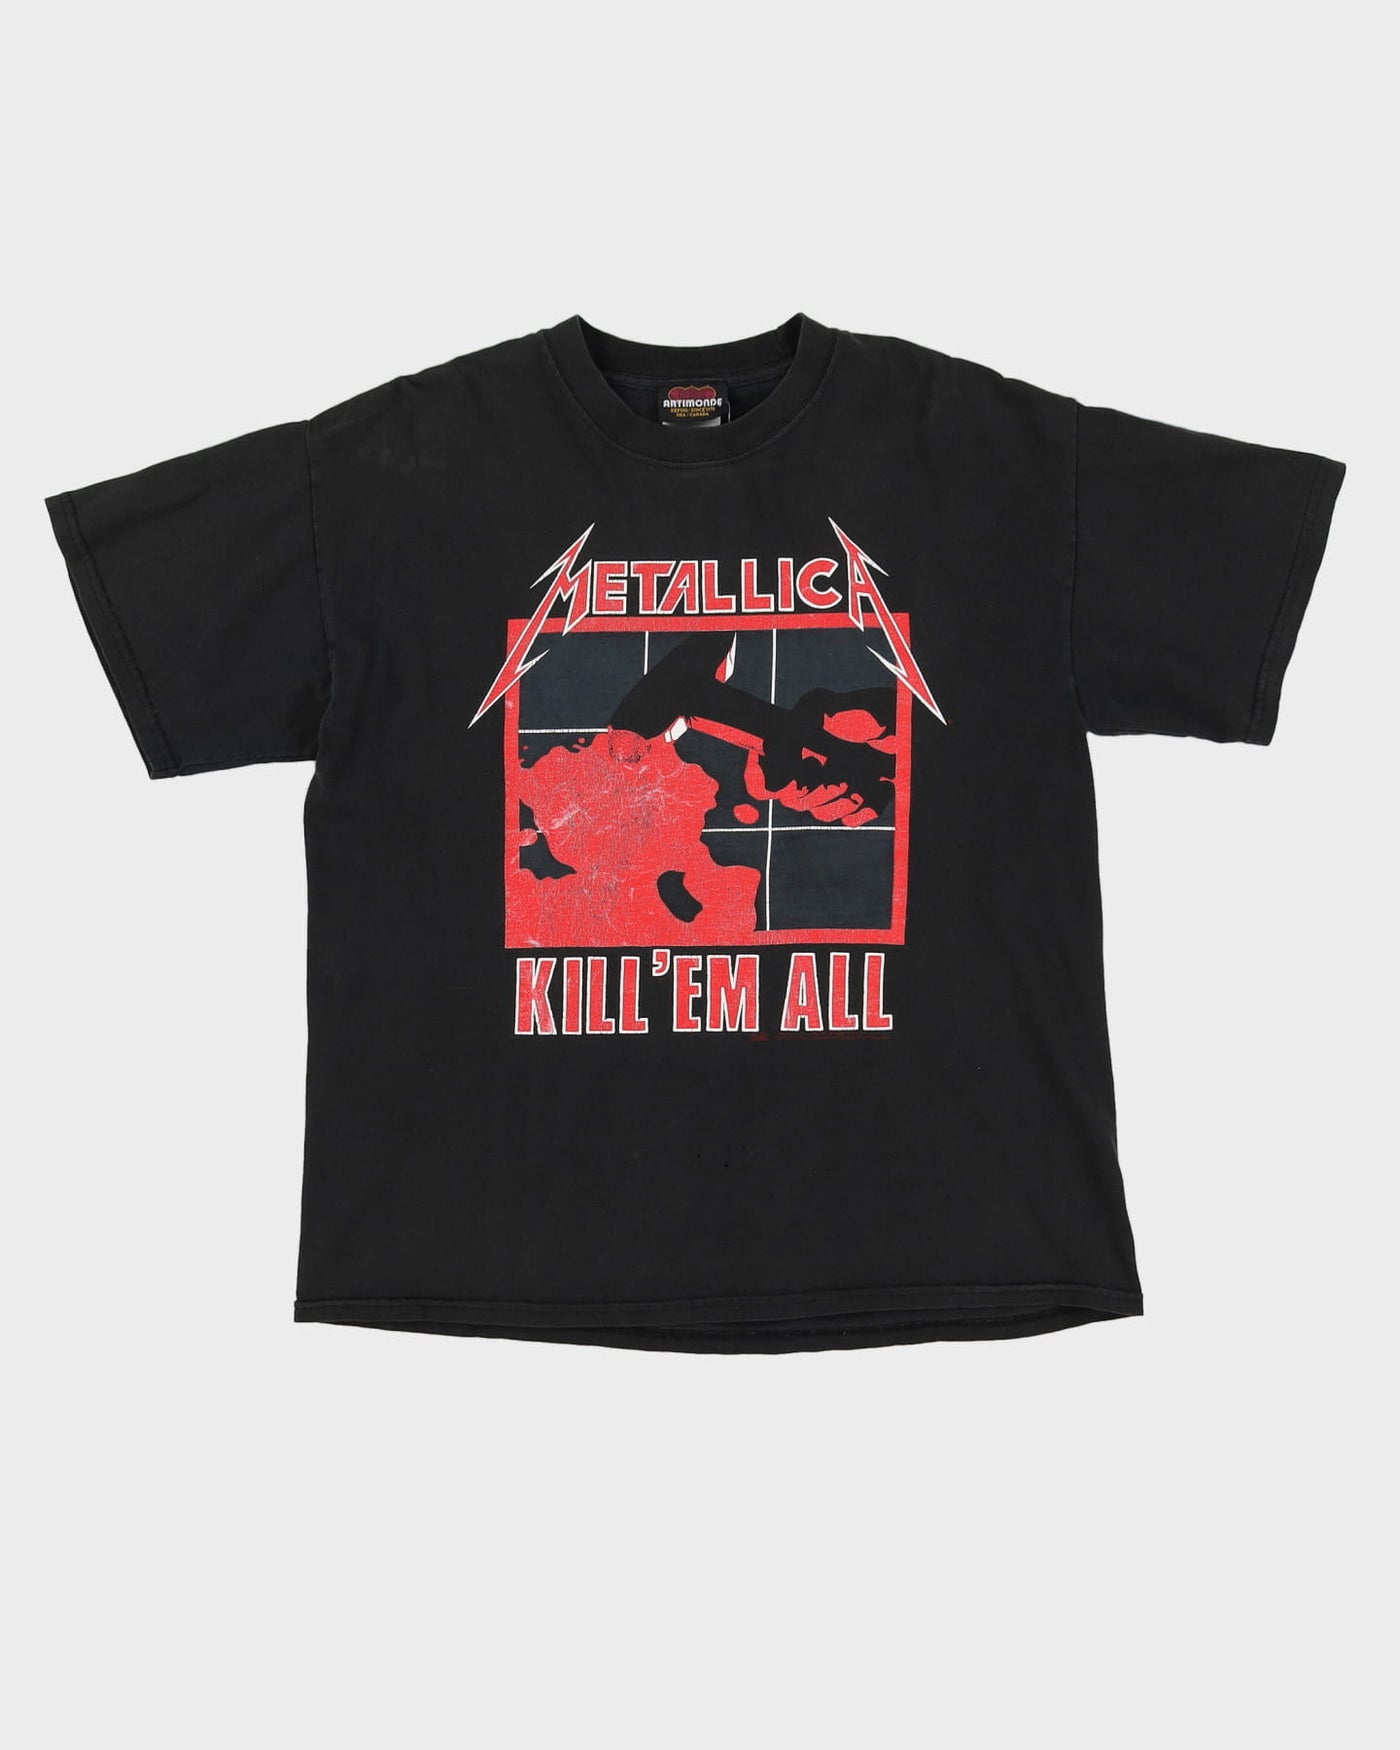 Thrashed 2003 Metallica Kill 'Em All Double Sided Graphic Band T-Shirt - L